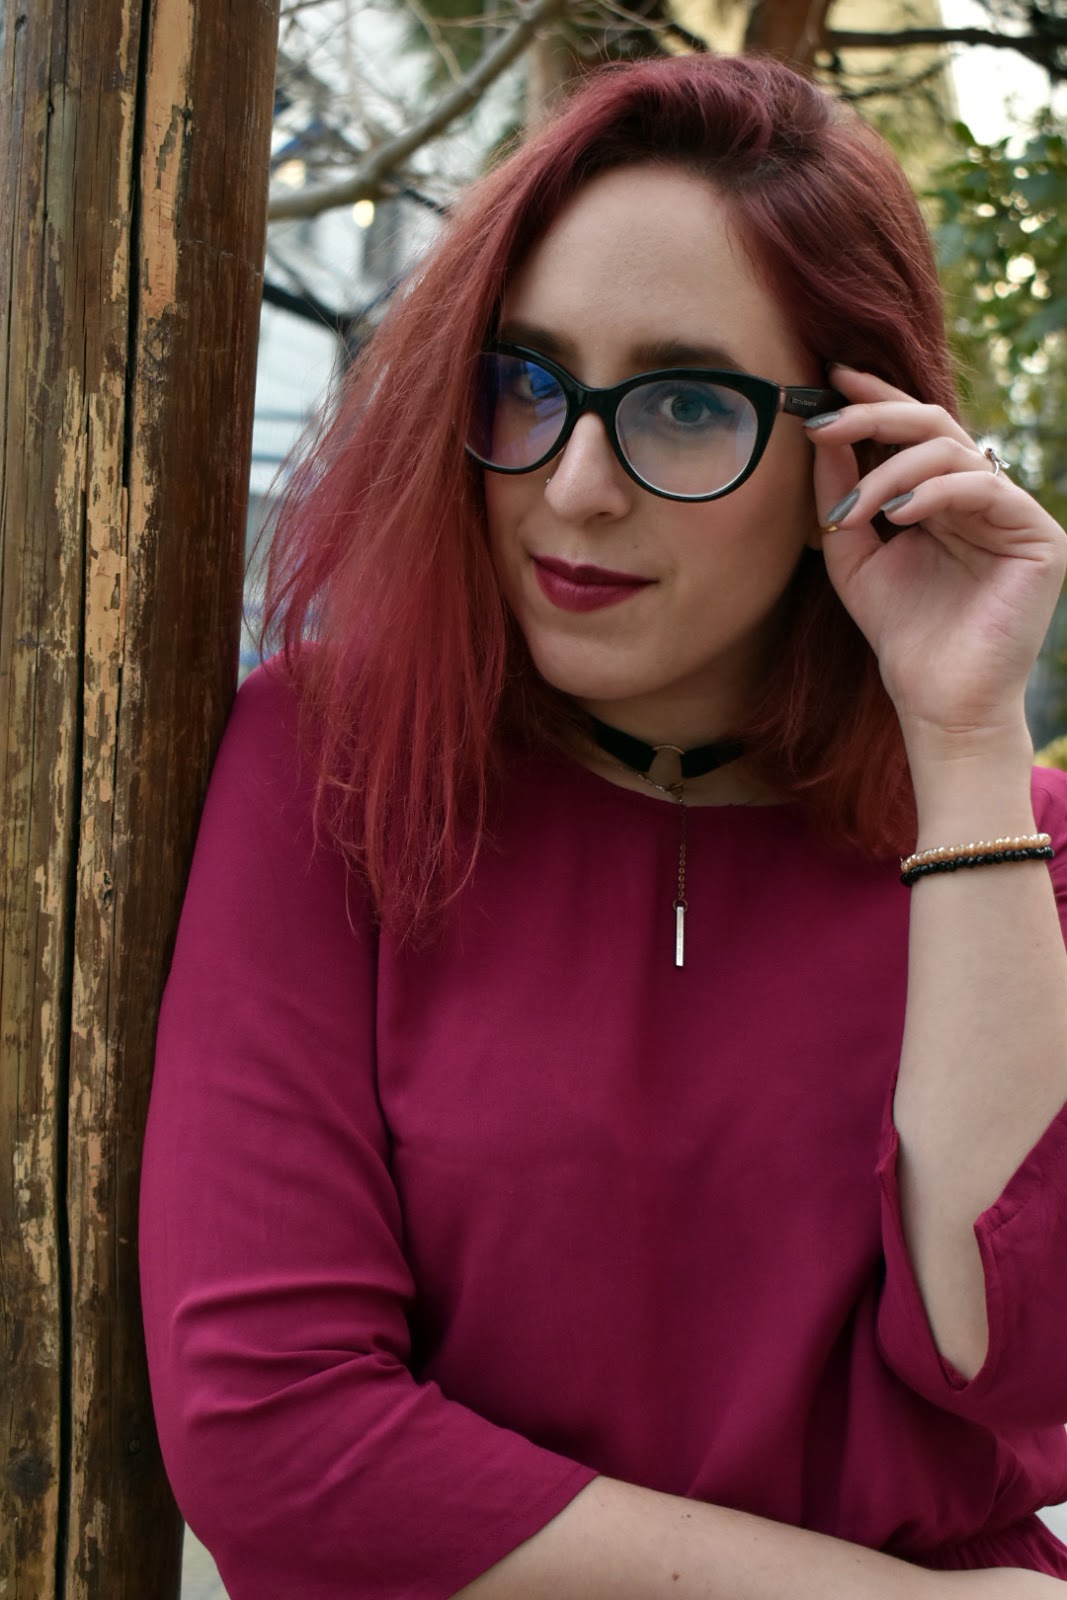 spotlights on badwolf, anna keni, anna, fashion, makeup, redhead,glasses, girl with glasses, Bad Wolf,fashion blogger,greek girl, greek fashion blogger, dress, magenta, h&m, spring,collection, trends, black, over the knee boots, otk, otkb, 